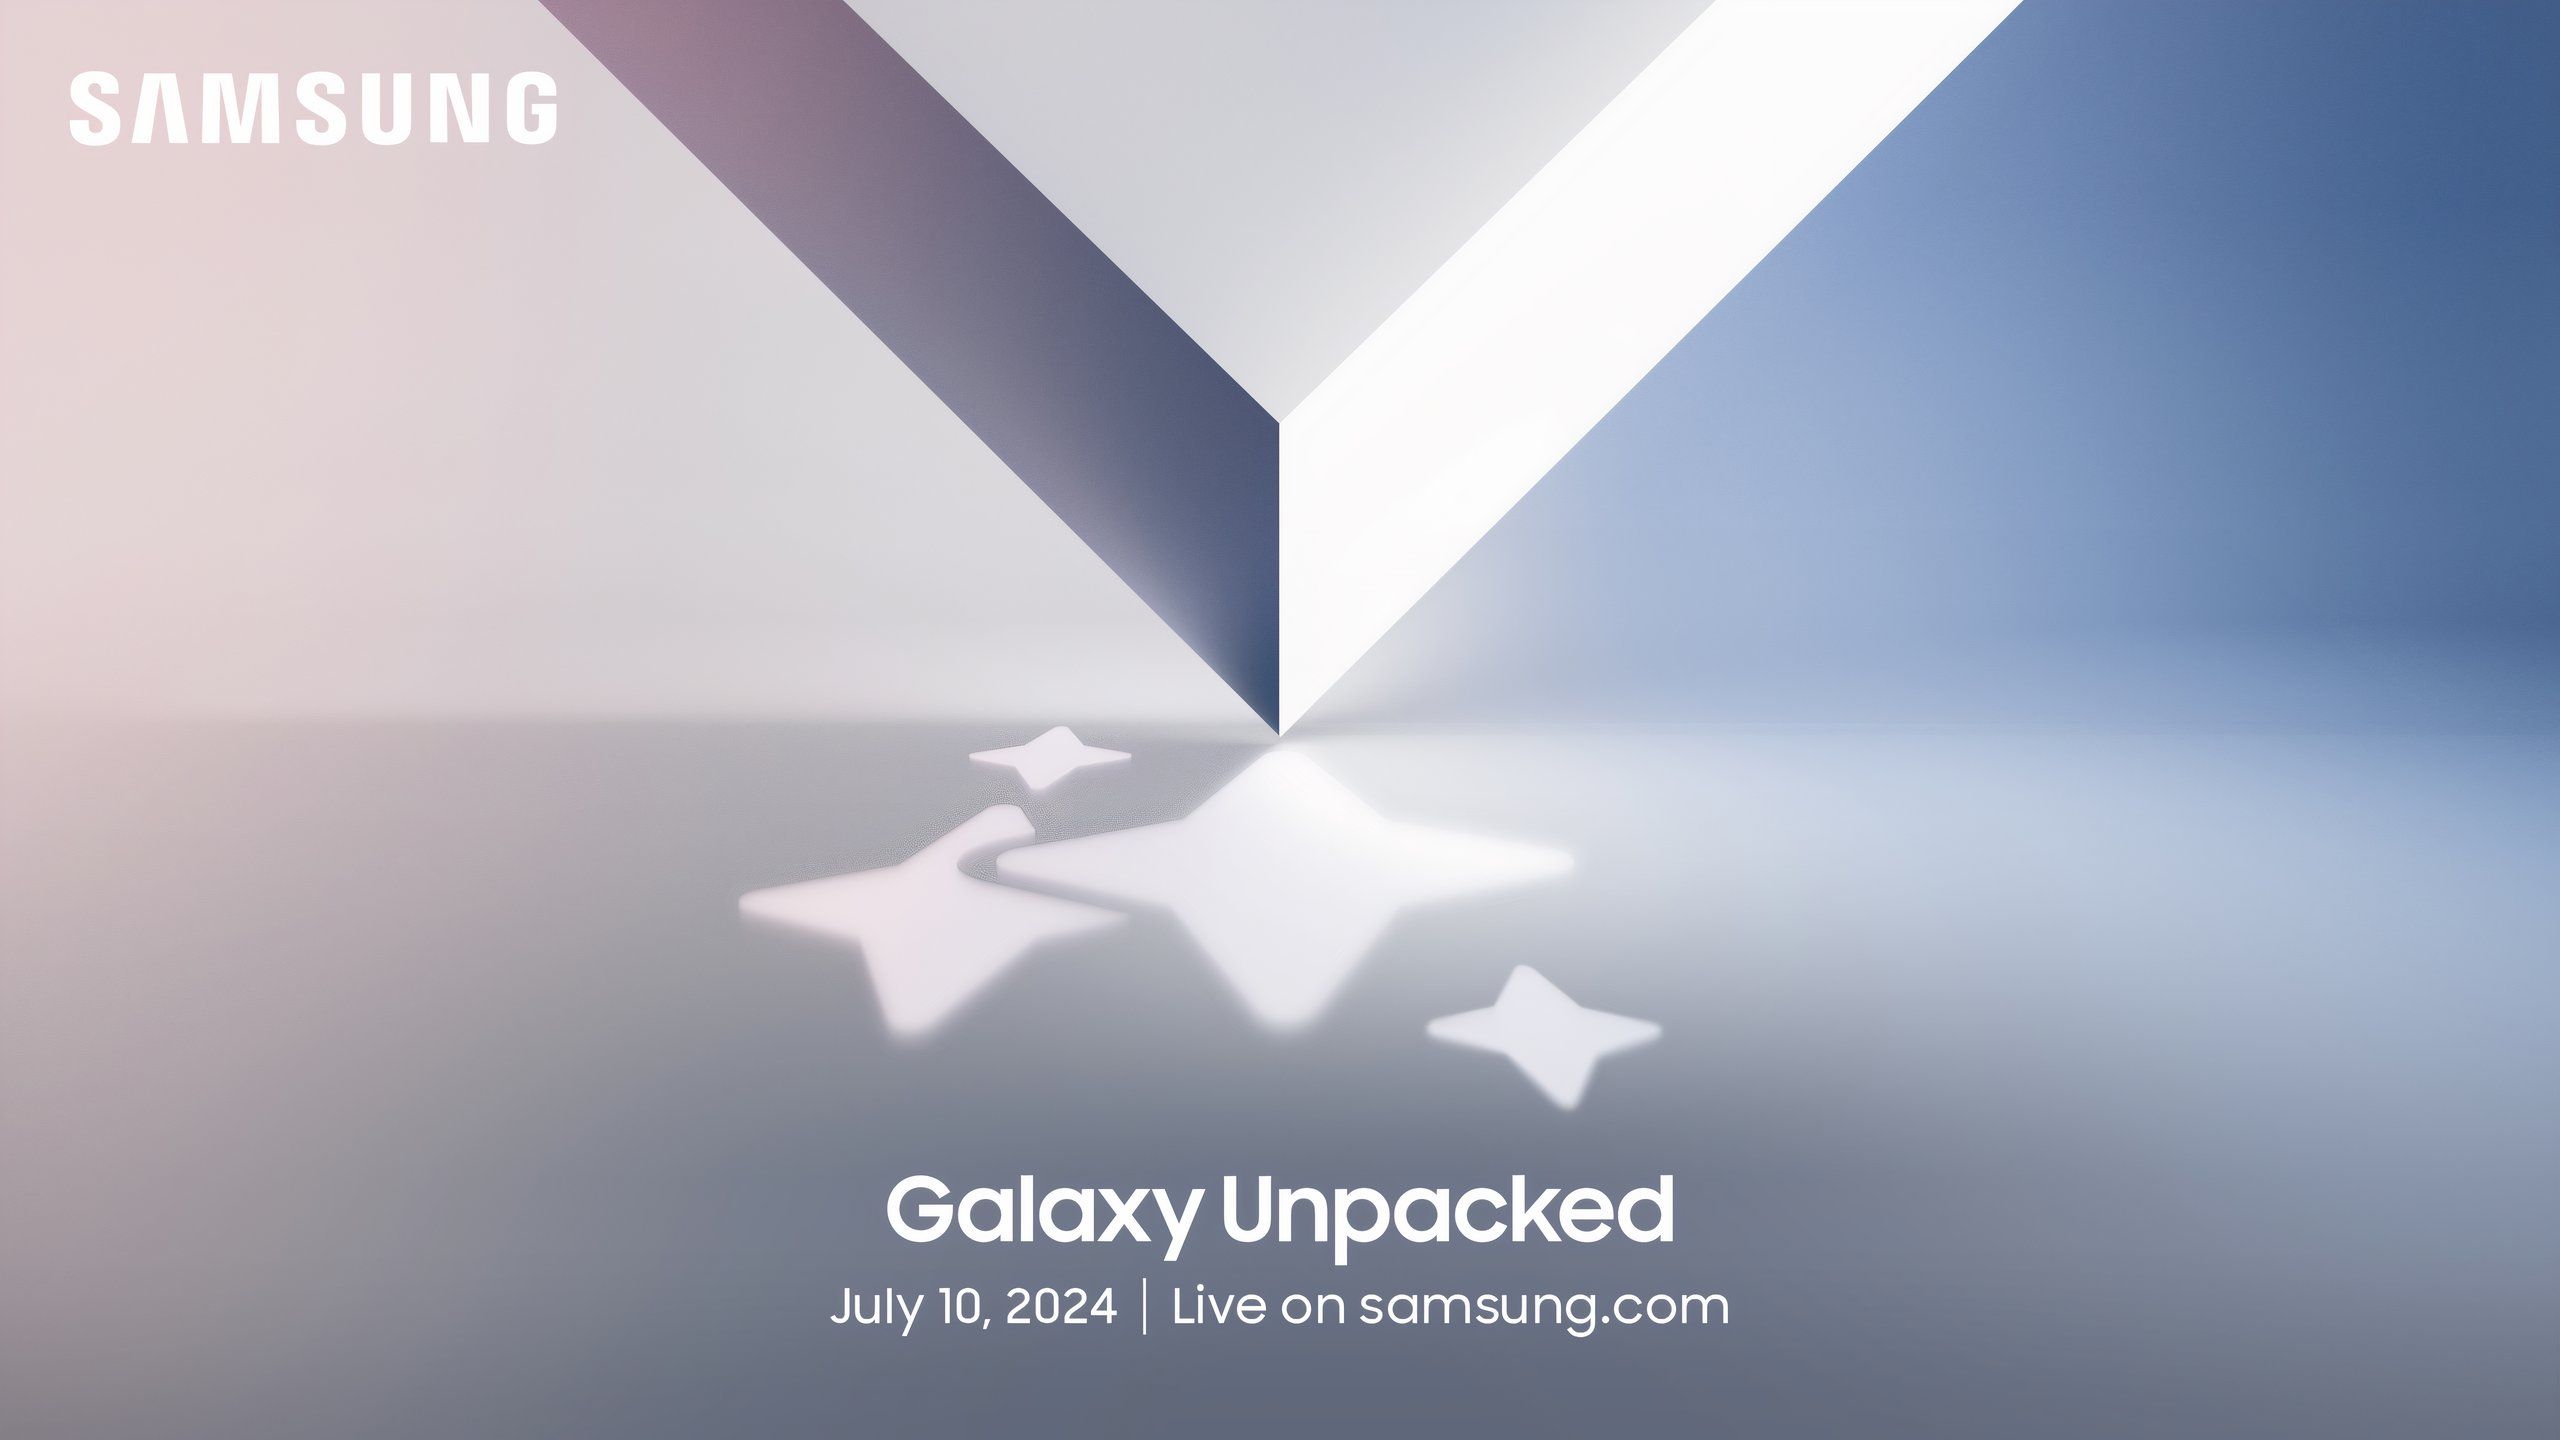 Samsung's poster for its July 10th Galaxy Unpacked with a clear 